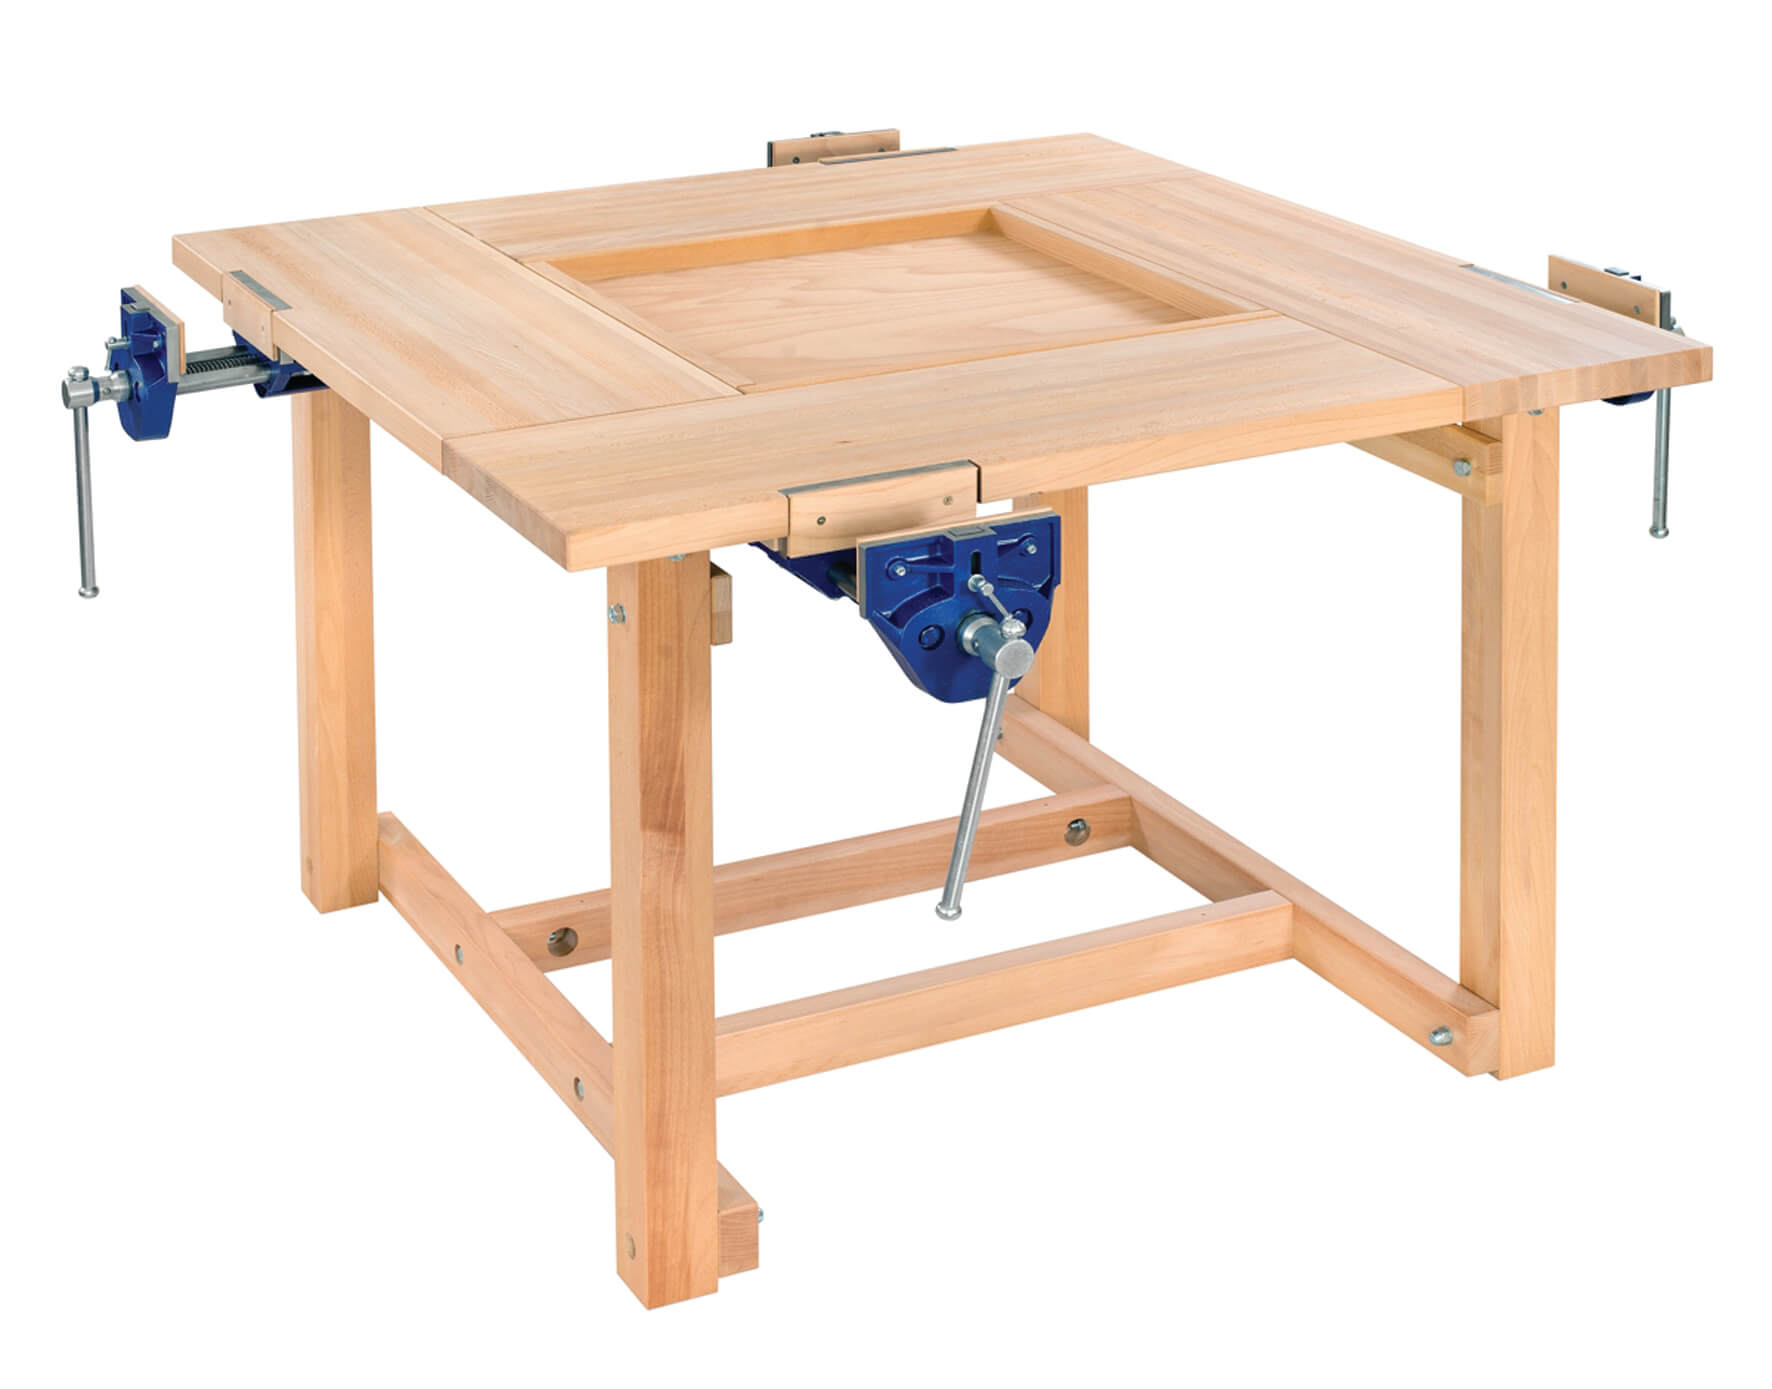 Edubench Traditional 4 Station Bench with plain screw vices